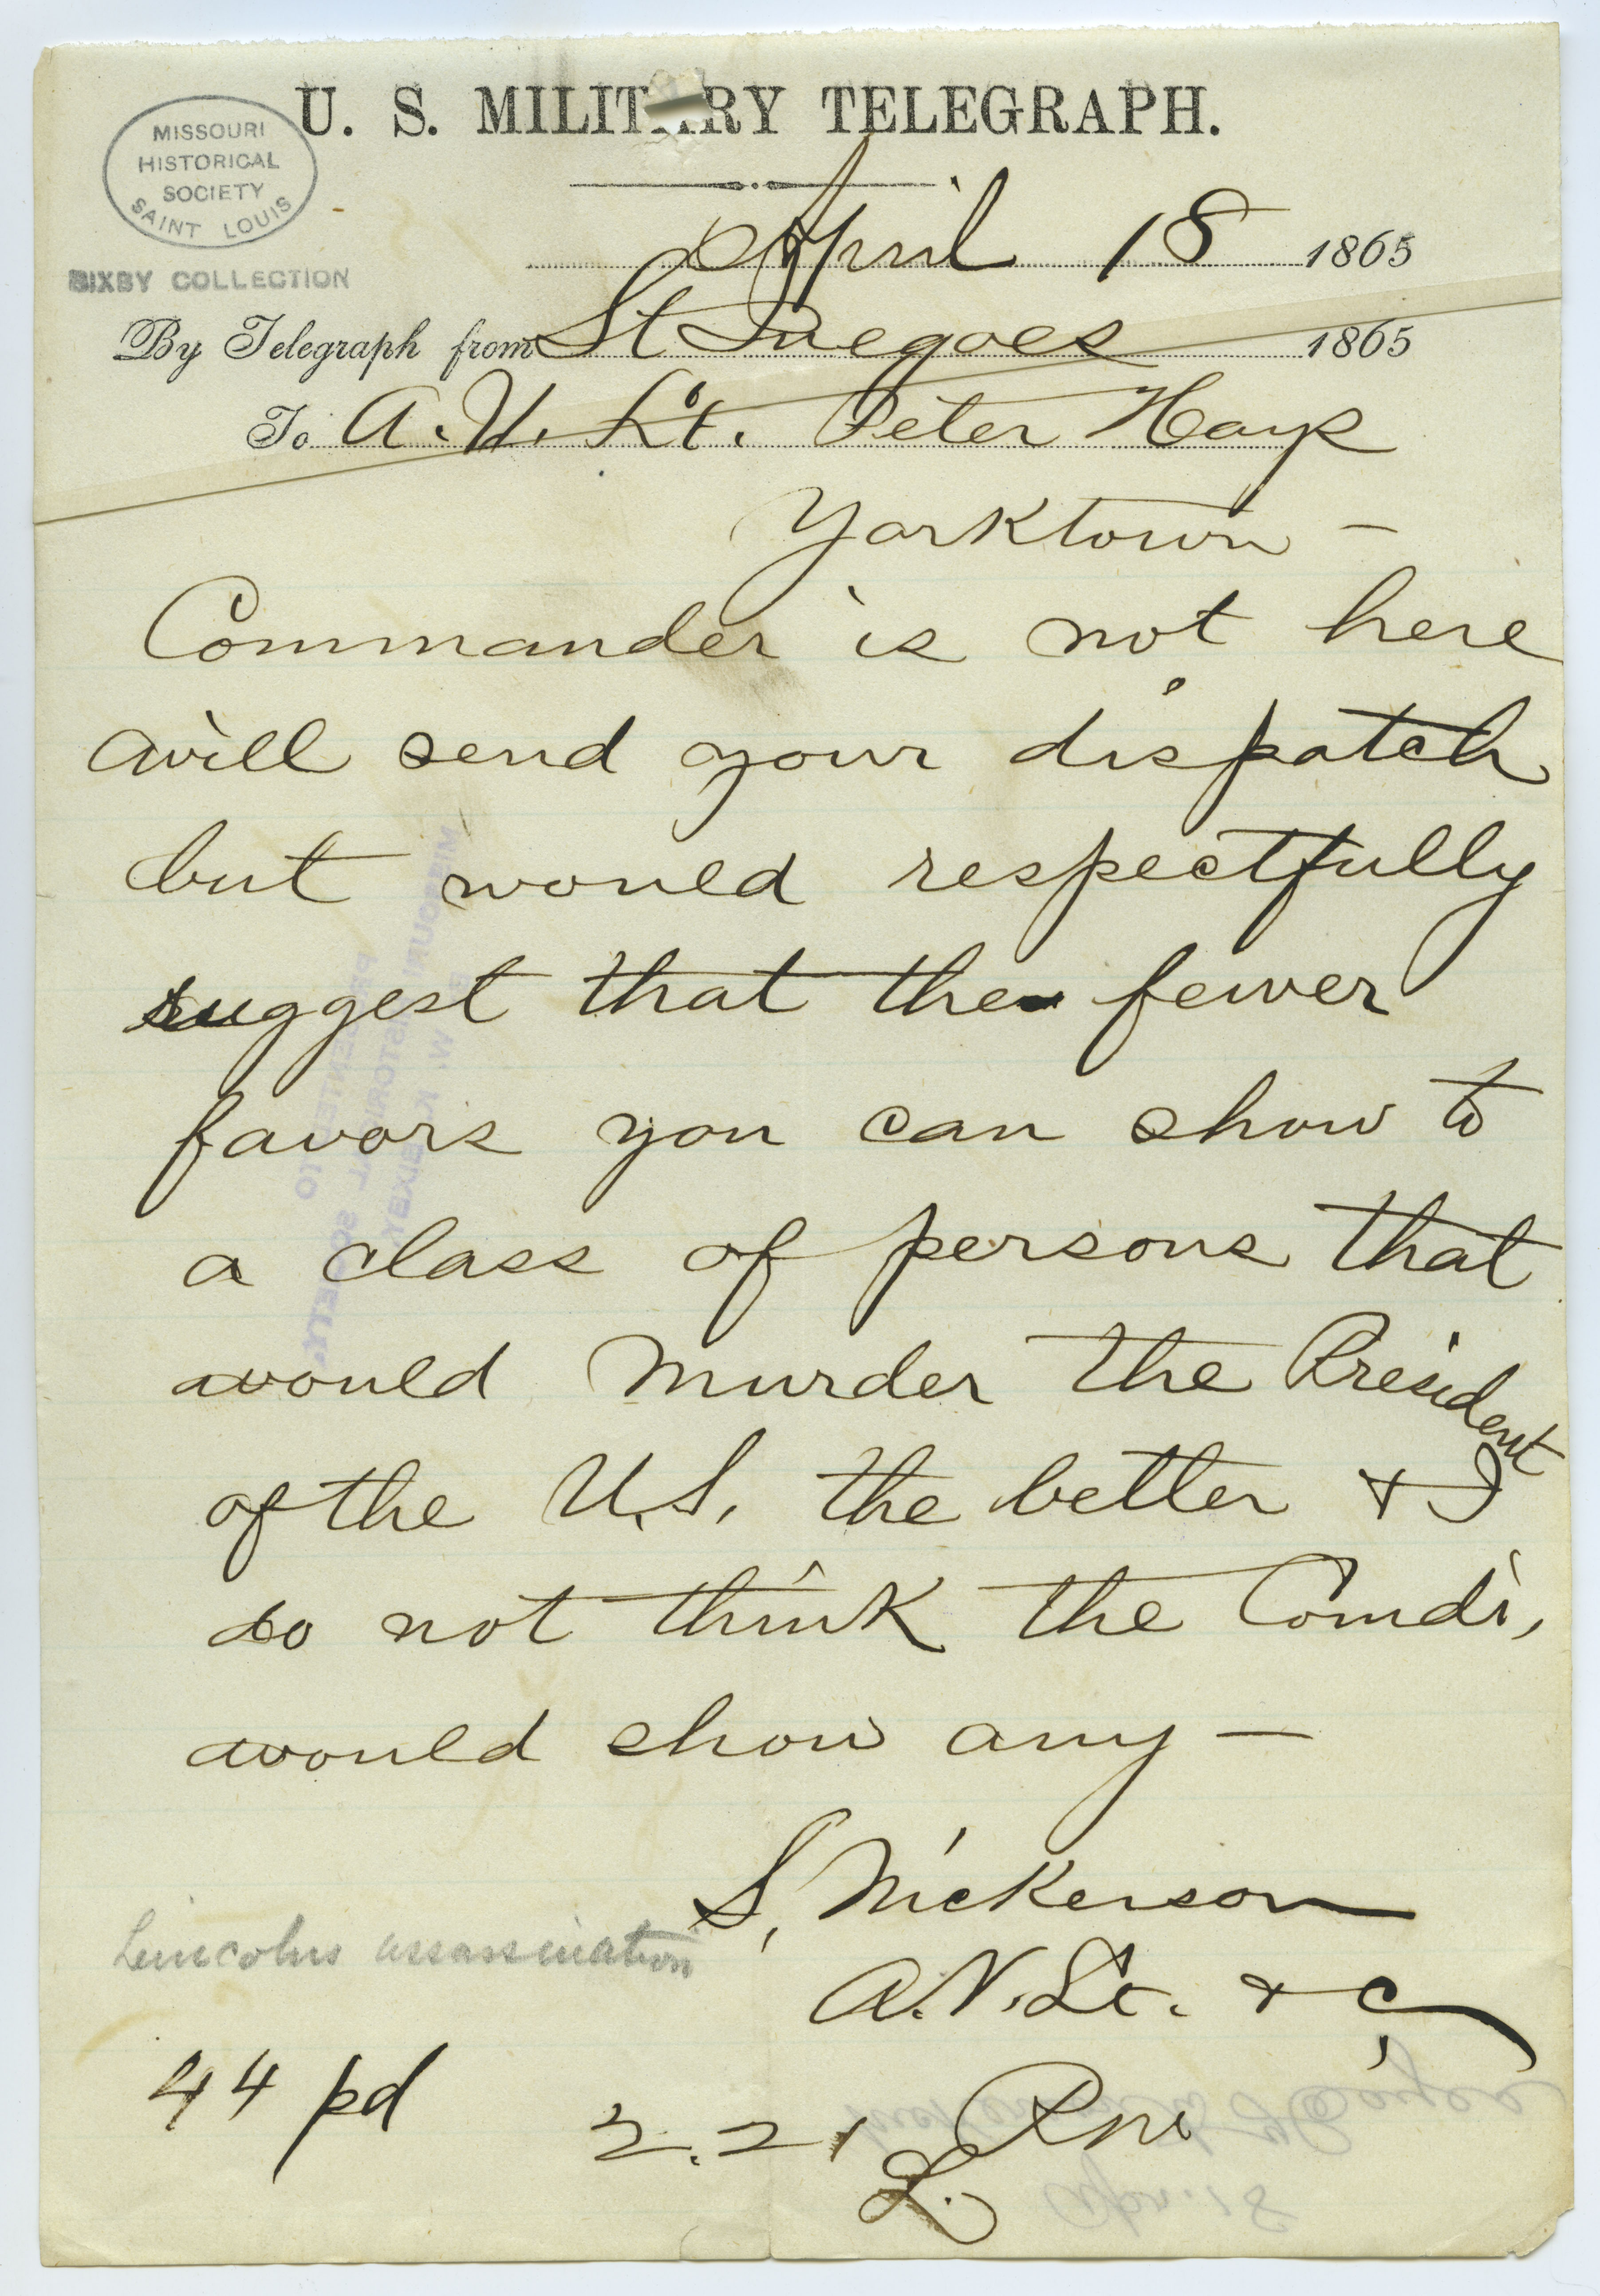 U.S. Military Telegraph of S. Nickerson, St. Inegoes [St. Inigoes], to A.N. Lt. Peter Hays, Yorktown, April 18, 1865